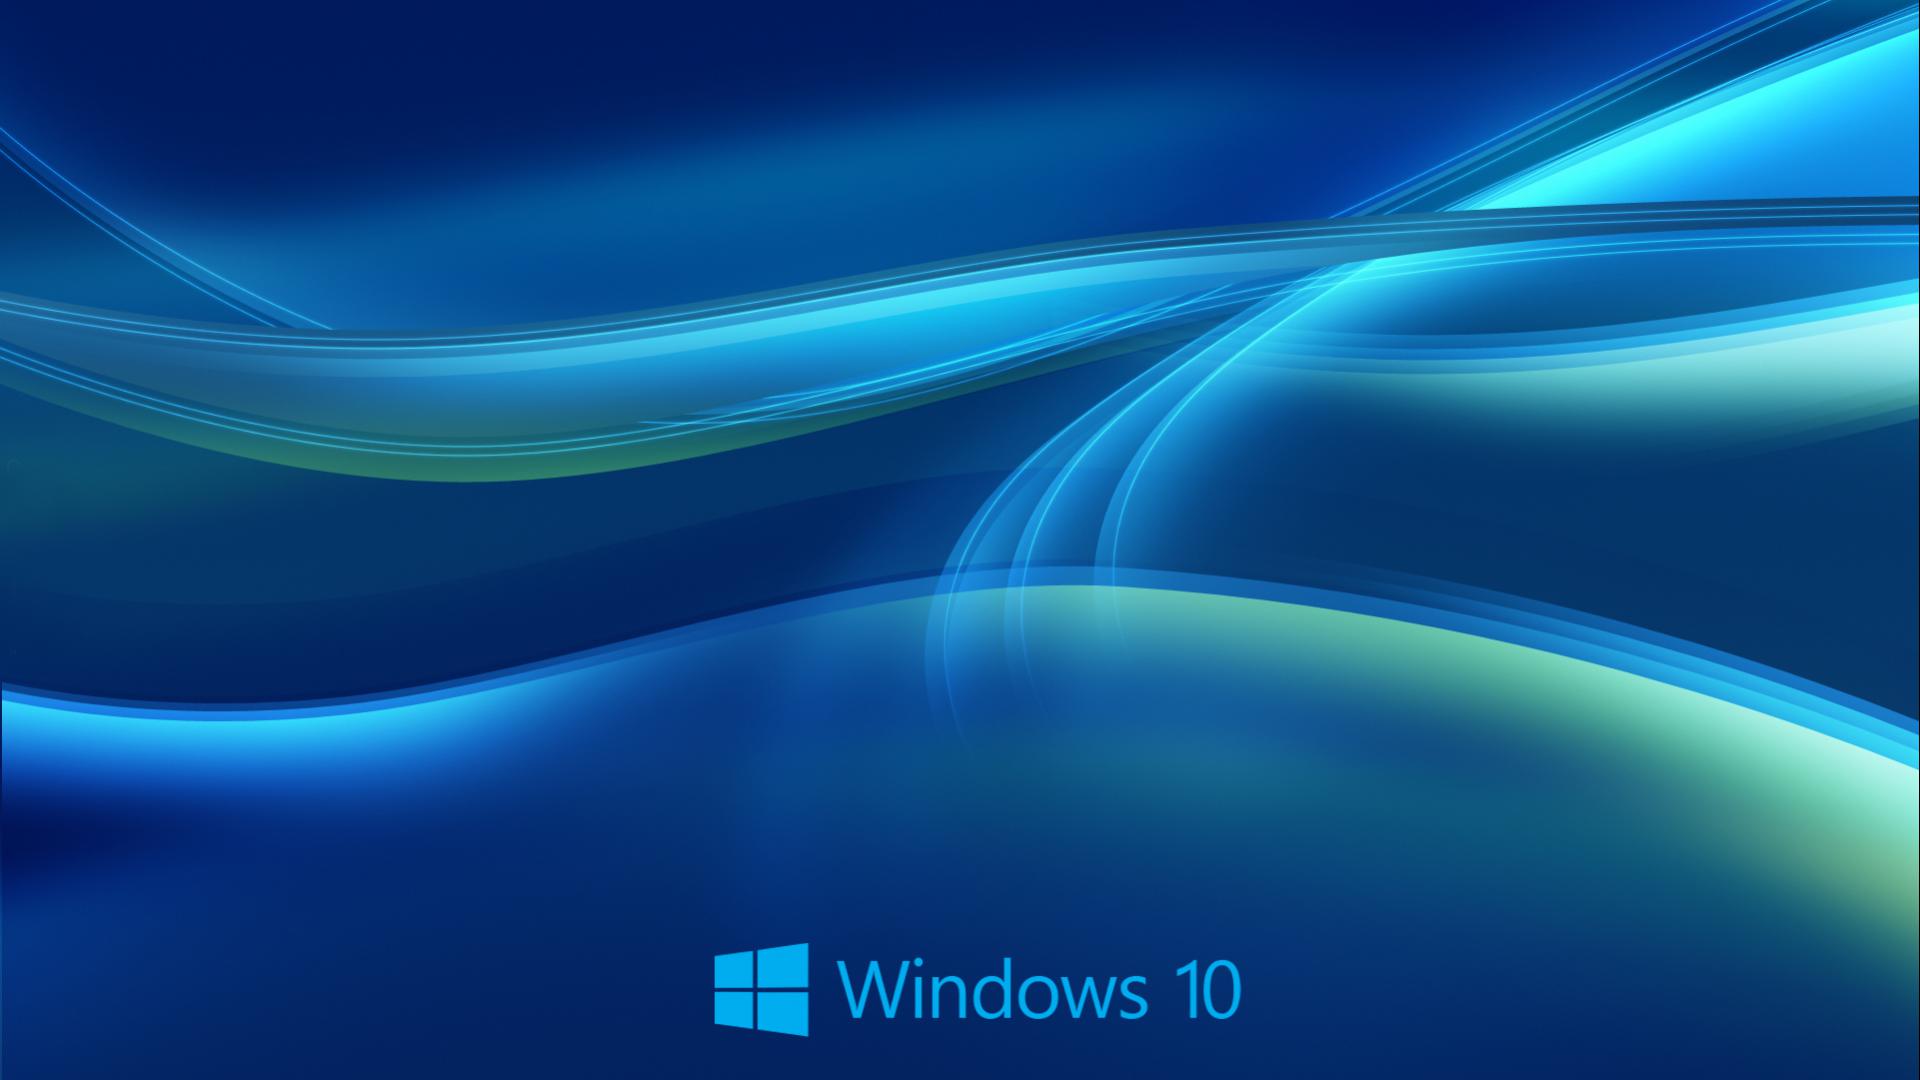 Cool Windows 10 Wallpapers Wallpapers